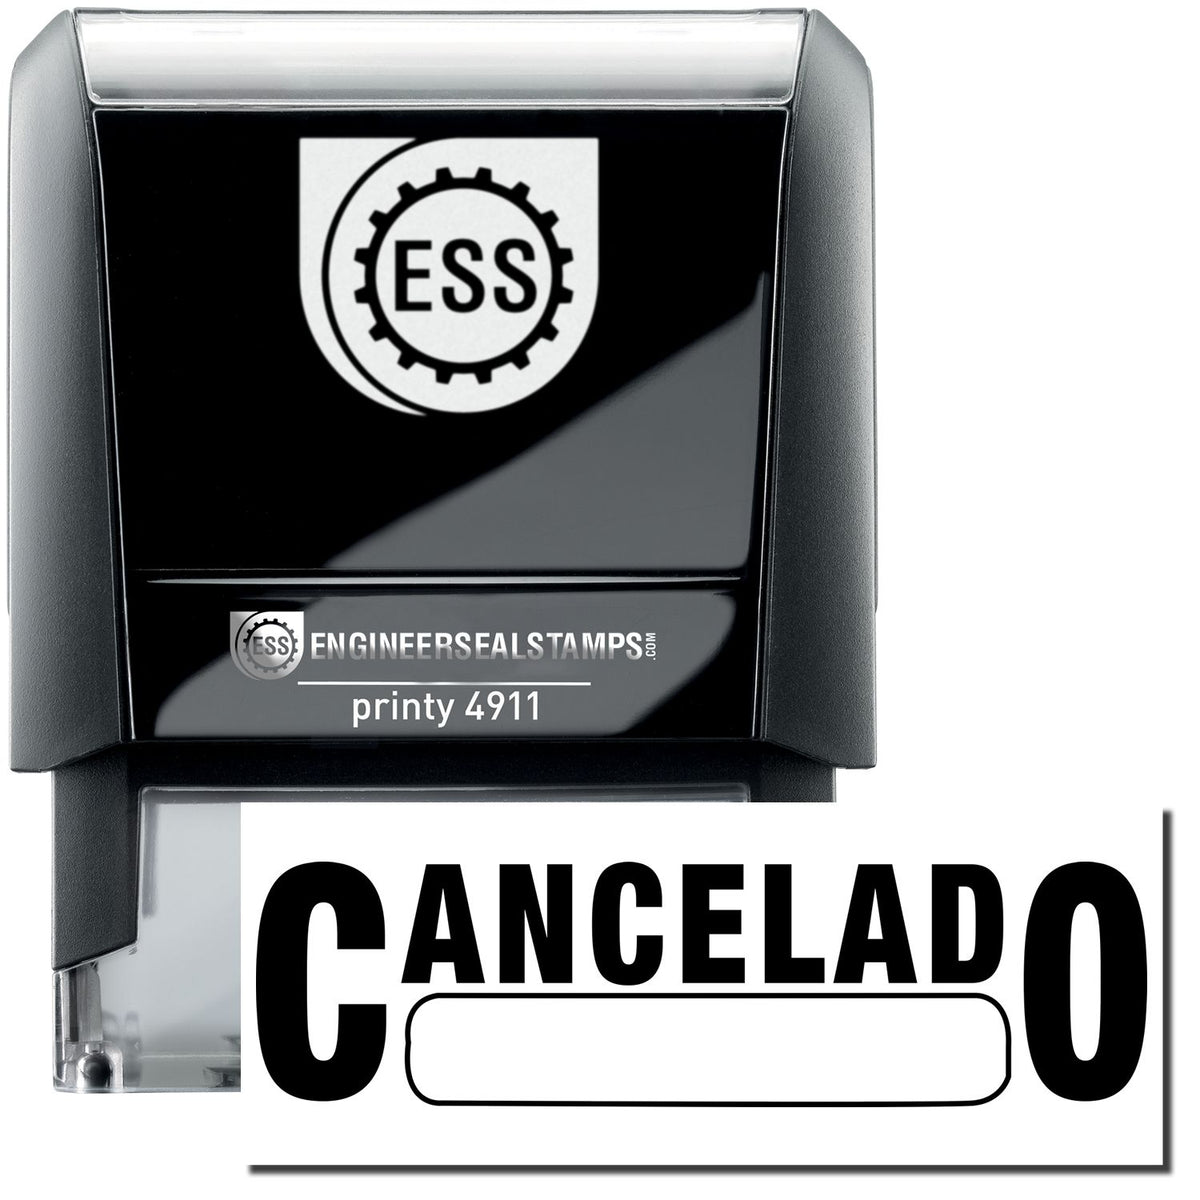 A self-inking stamp with a stamped image showing how the text &quot;CANCELADO&quot; with a box below the text is displayed after stamping.